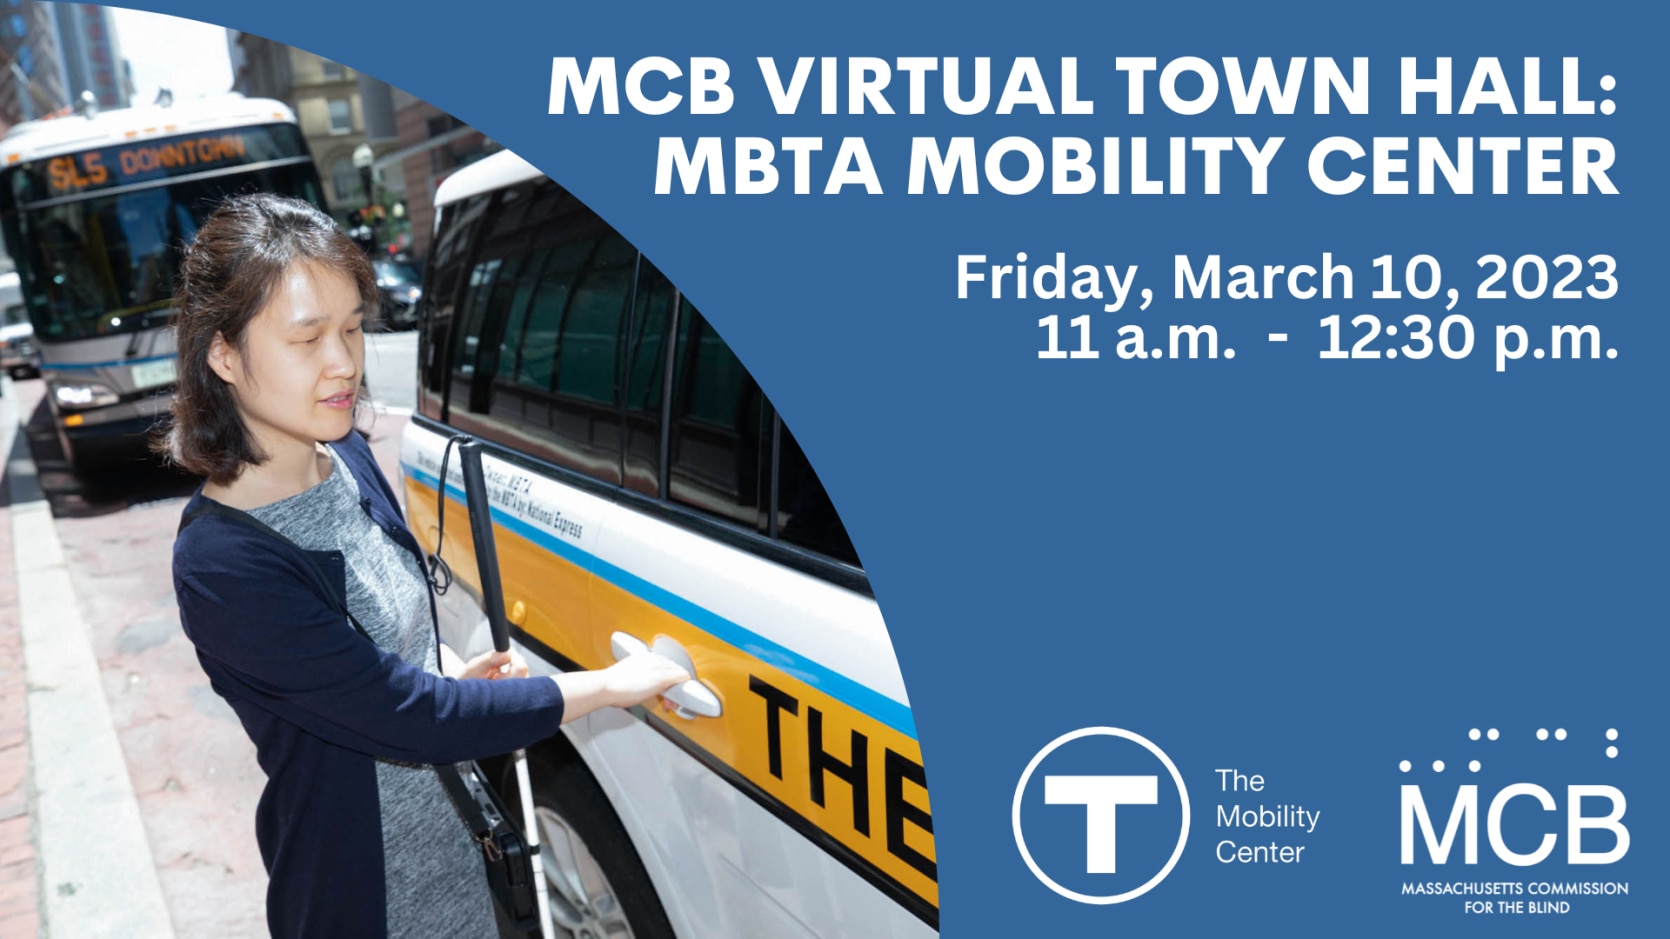 A blue background with a photo of a woman holding a white cane in her left hand and opening the door handle of a The RIDE vehicle with her right hand. The text reads, MCB Virtual Town Hall: MBTA Mobility Center, Friday, March 10, 2023, 11 a.m. - 12:30 p.m. The MBTA Mobility Center and MCB logos are included.